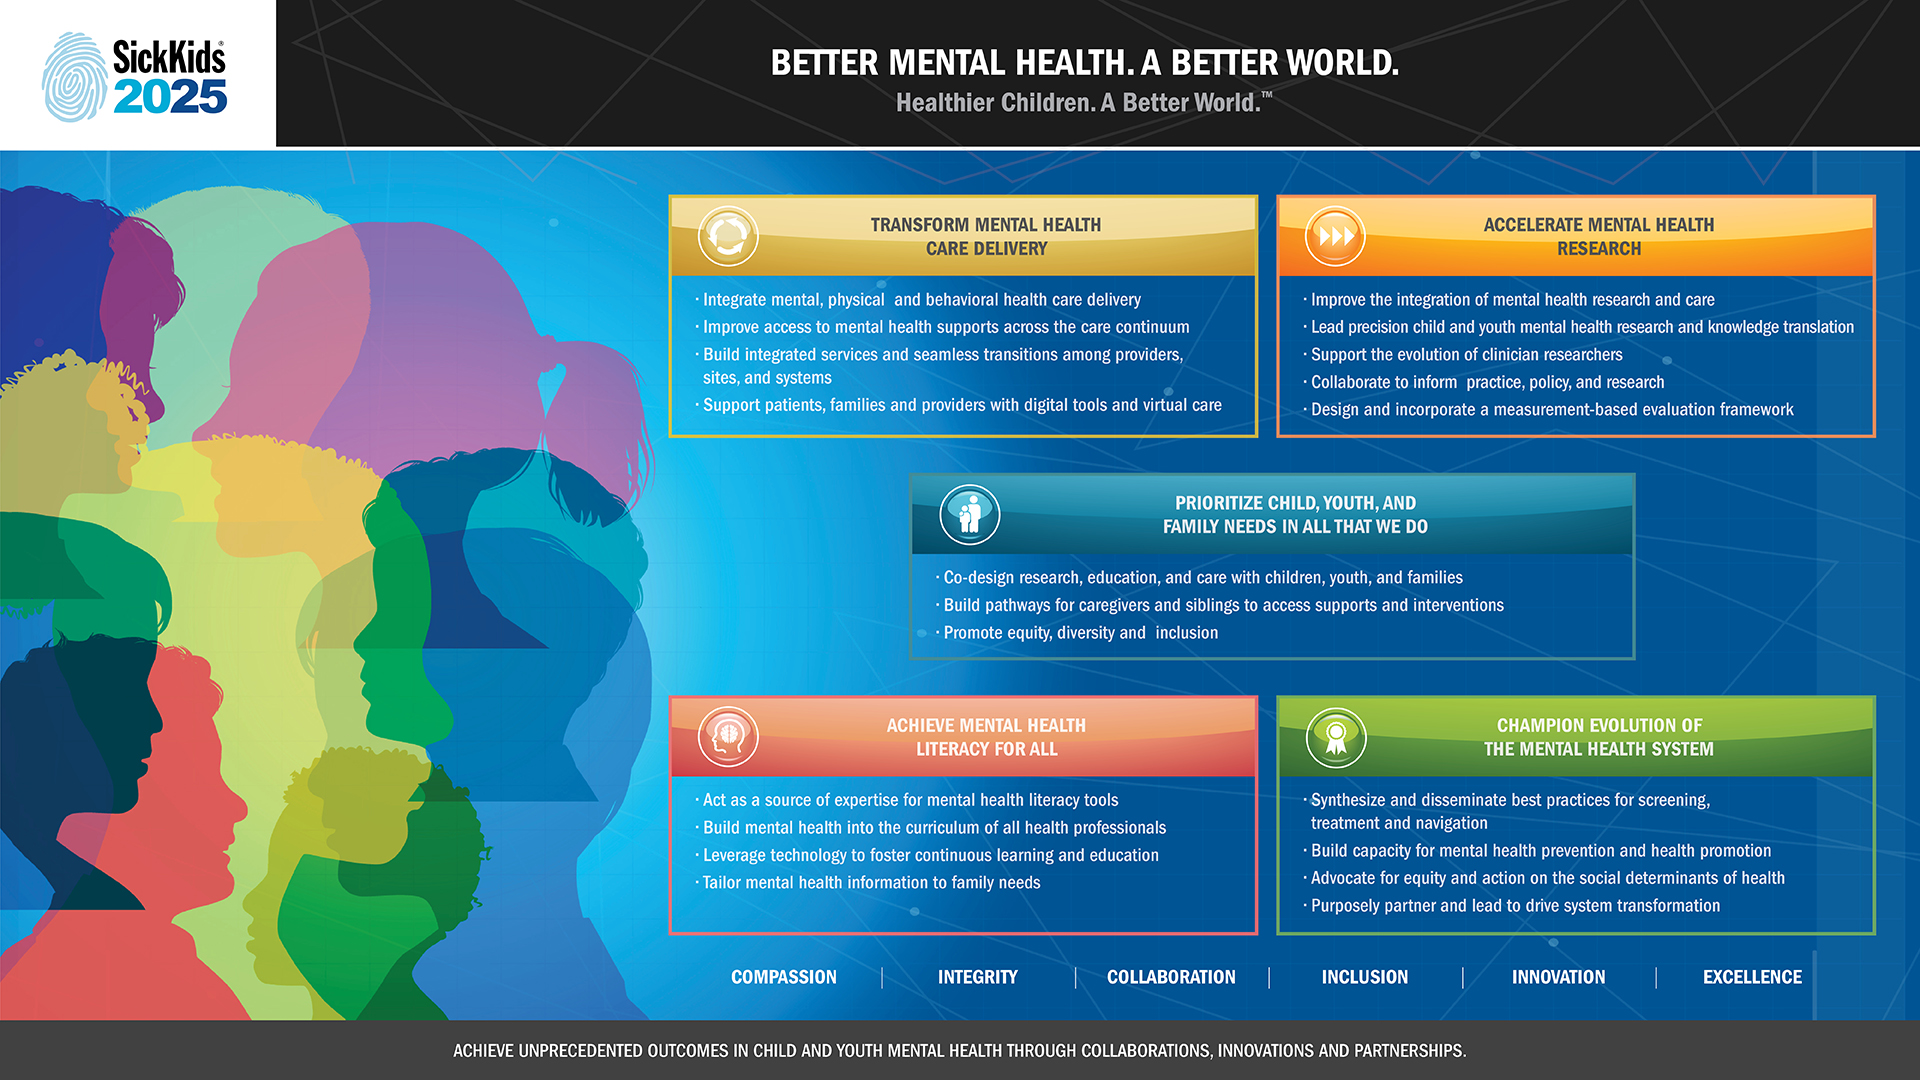 View a PDF of the Mental Health strategy map